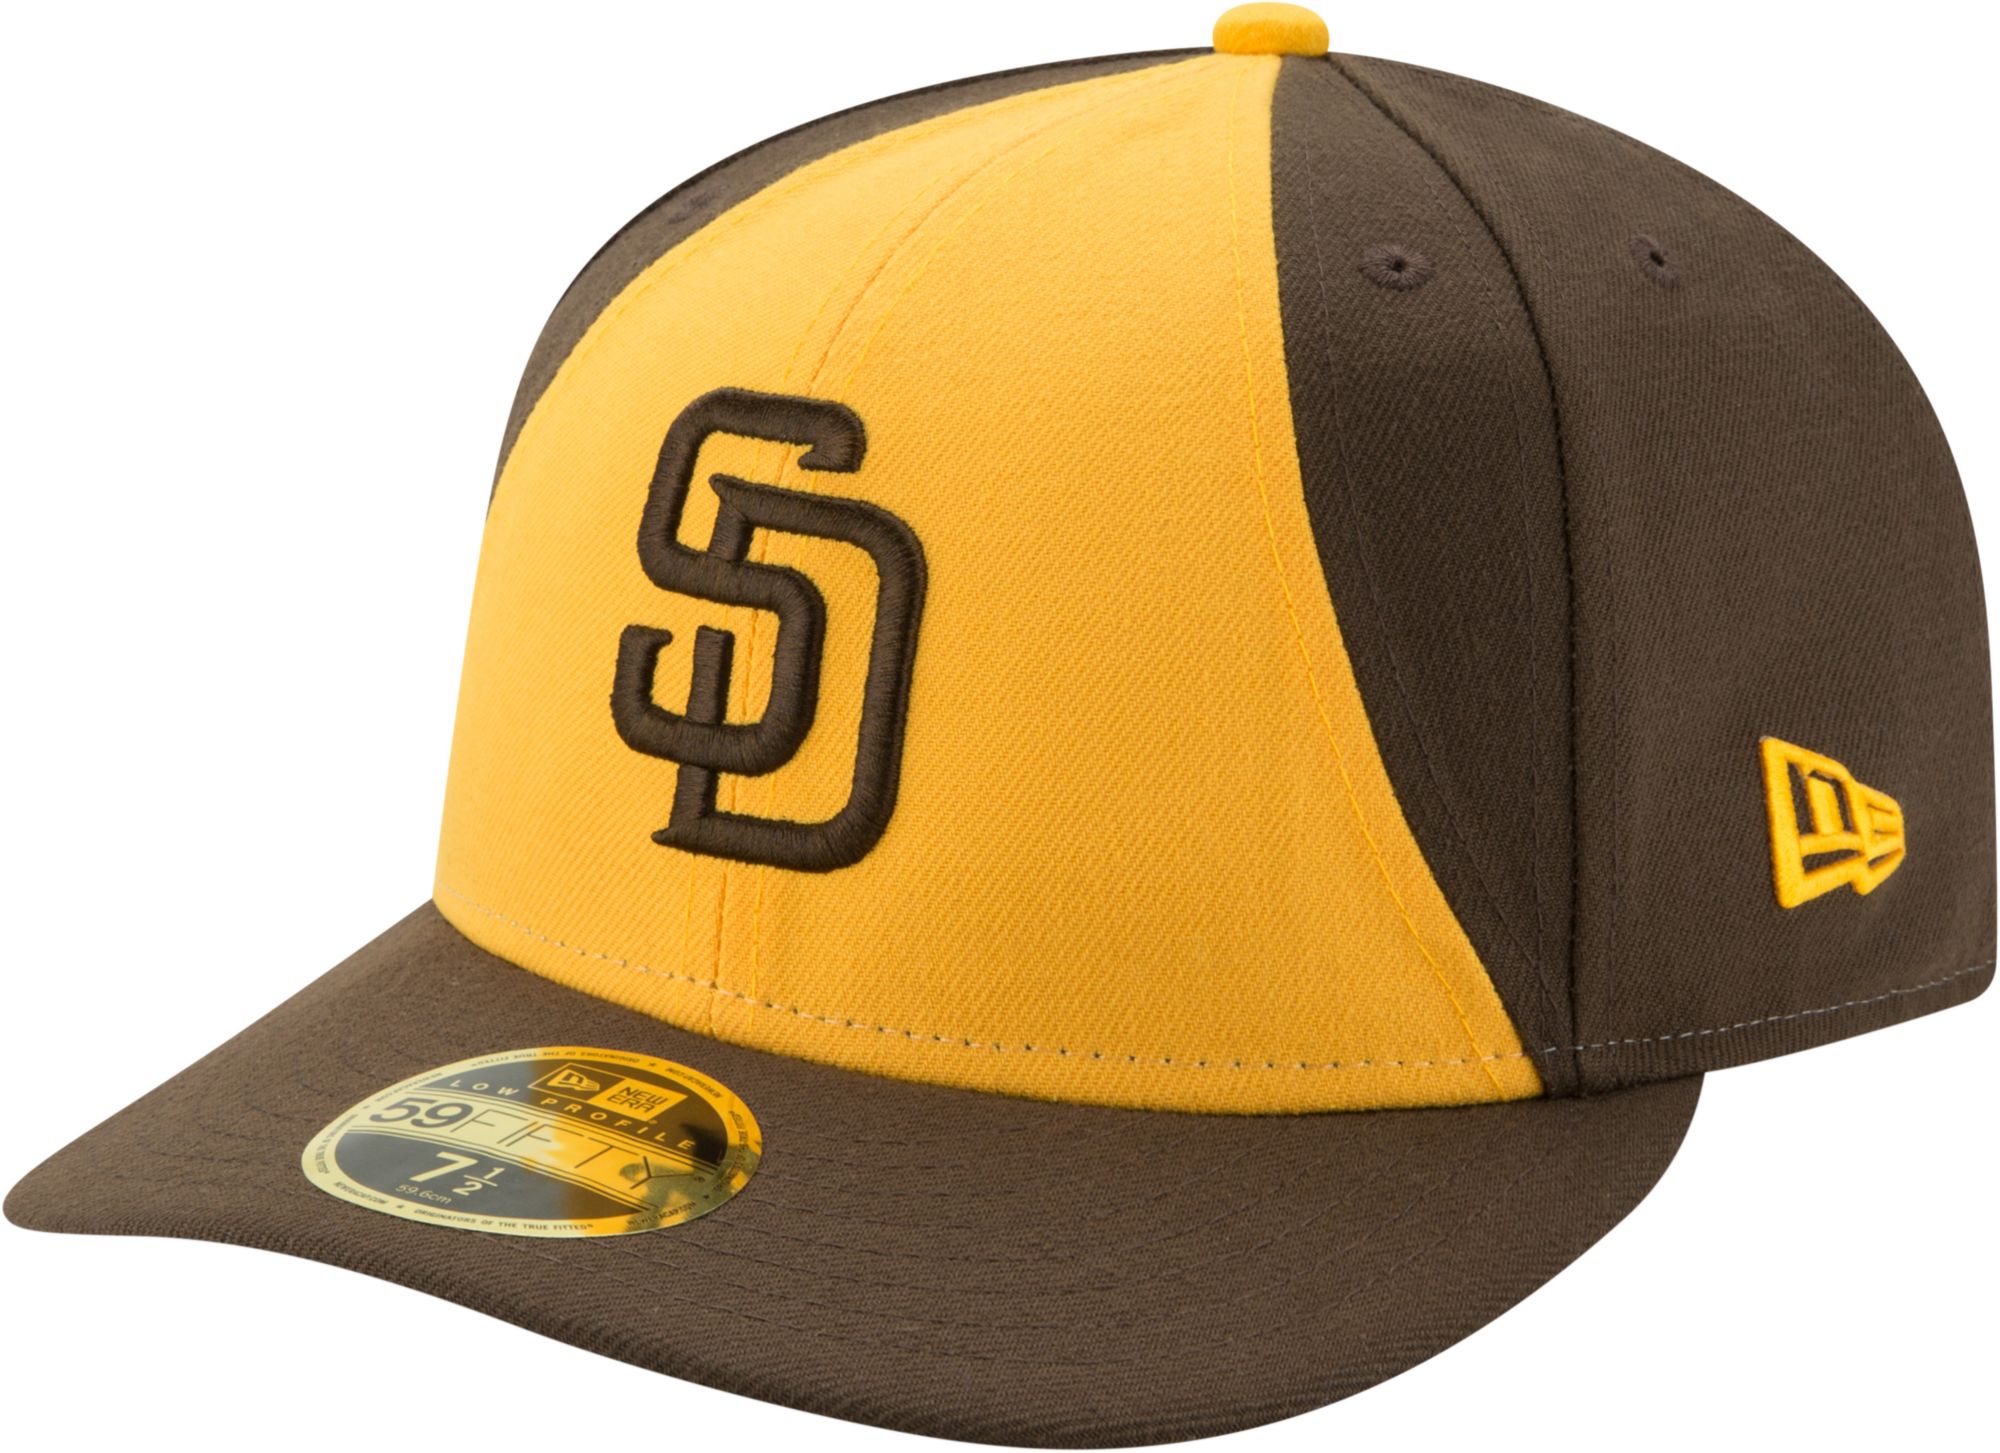 san diego padres clearance